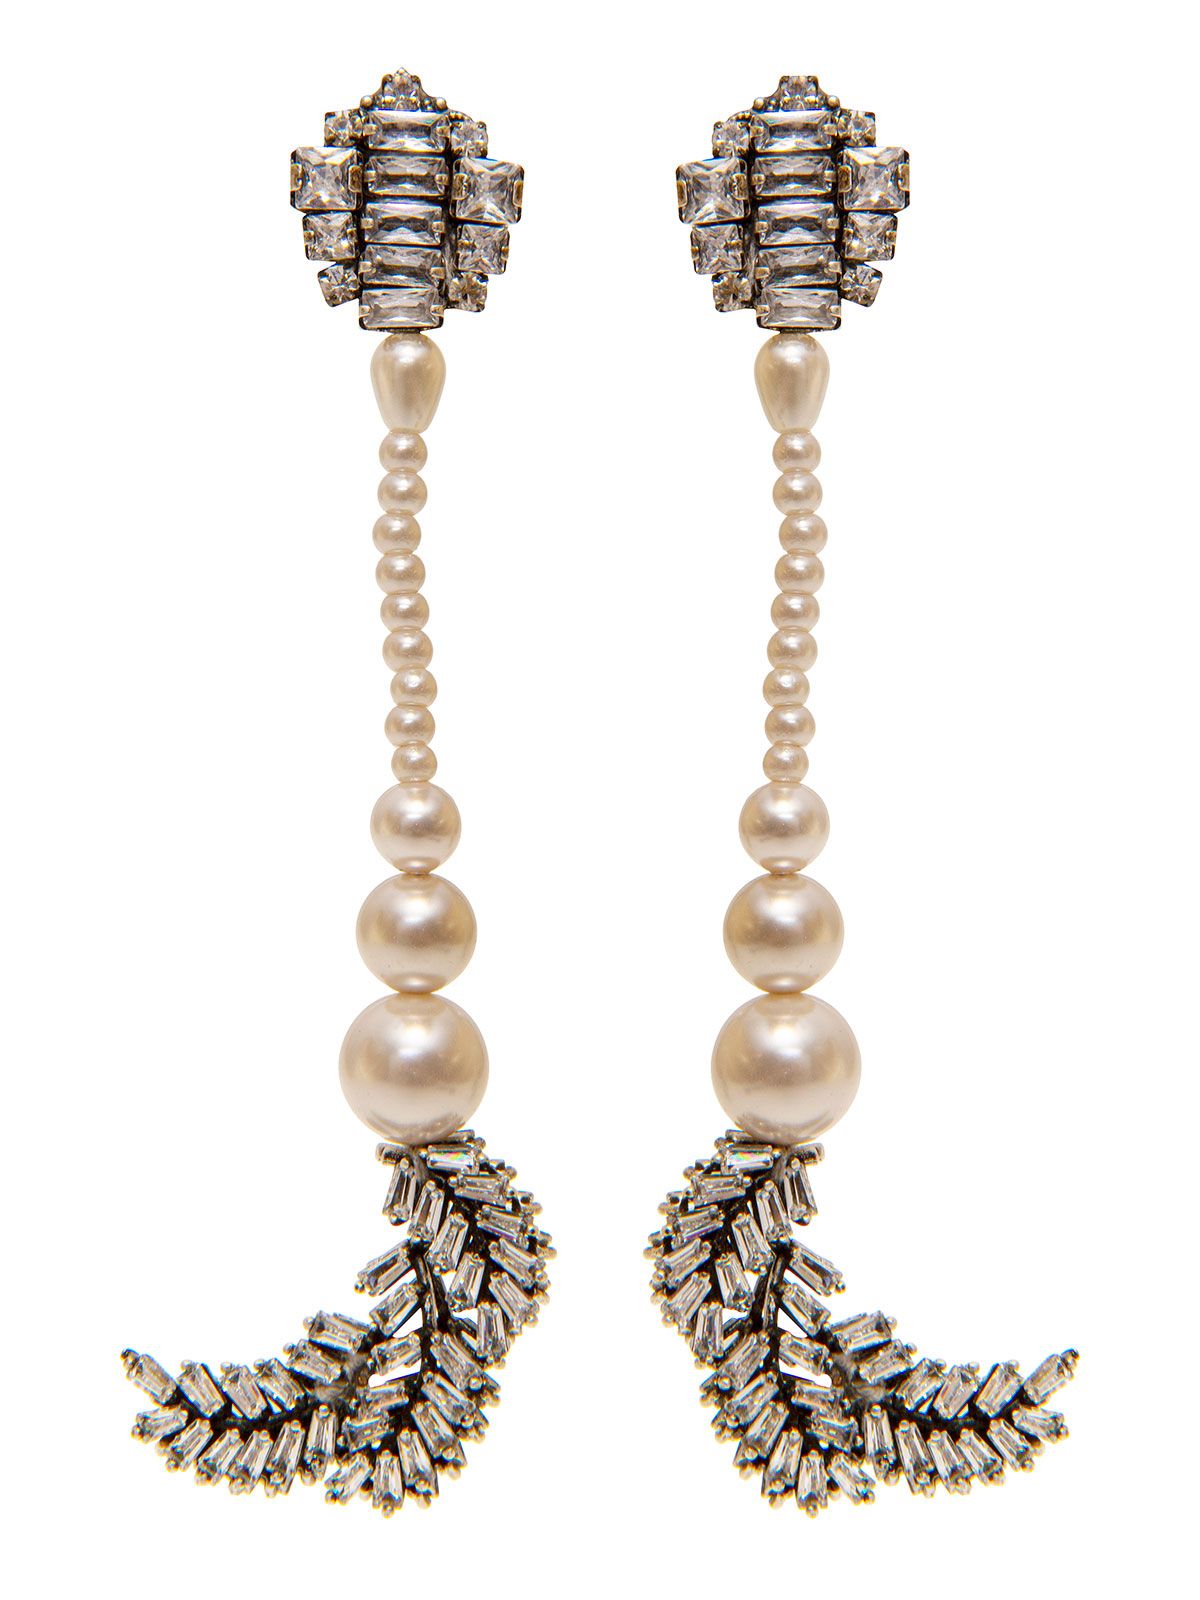 Crystal earrings with pendent pearl and final crystal leaves